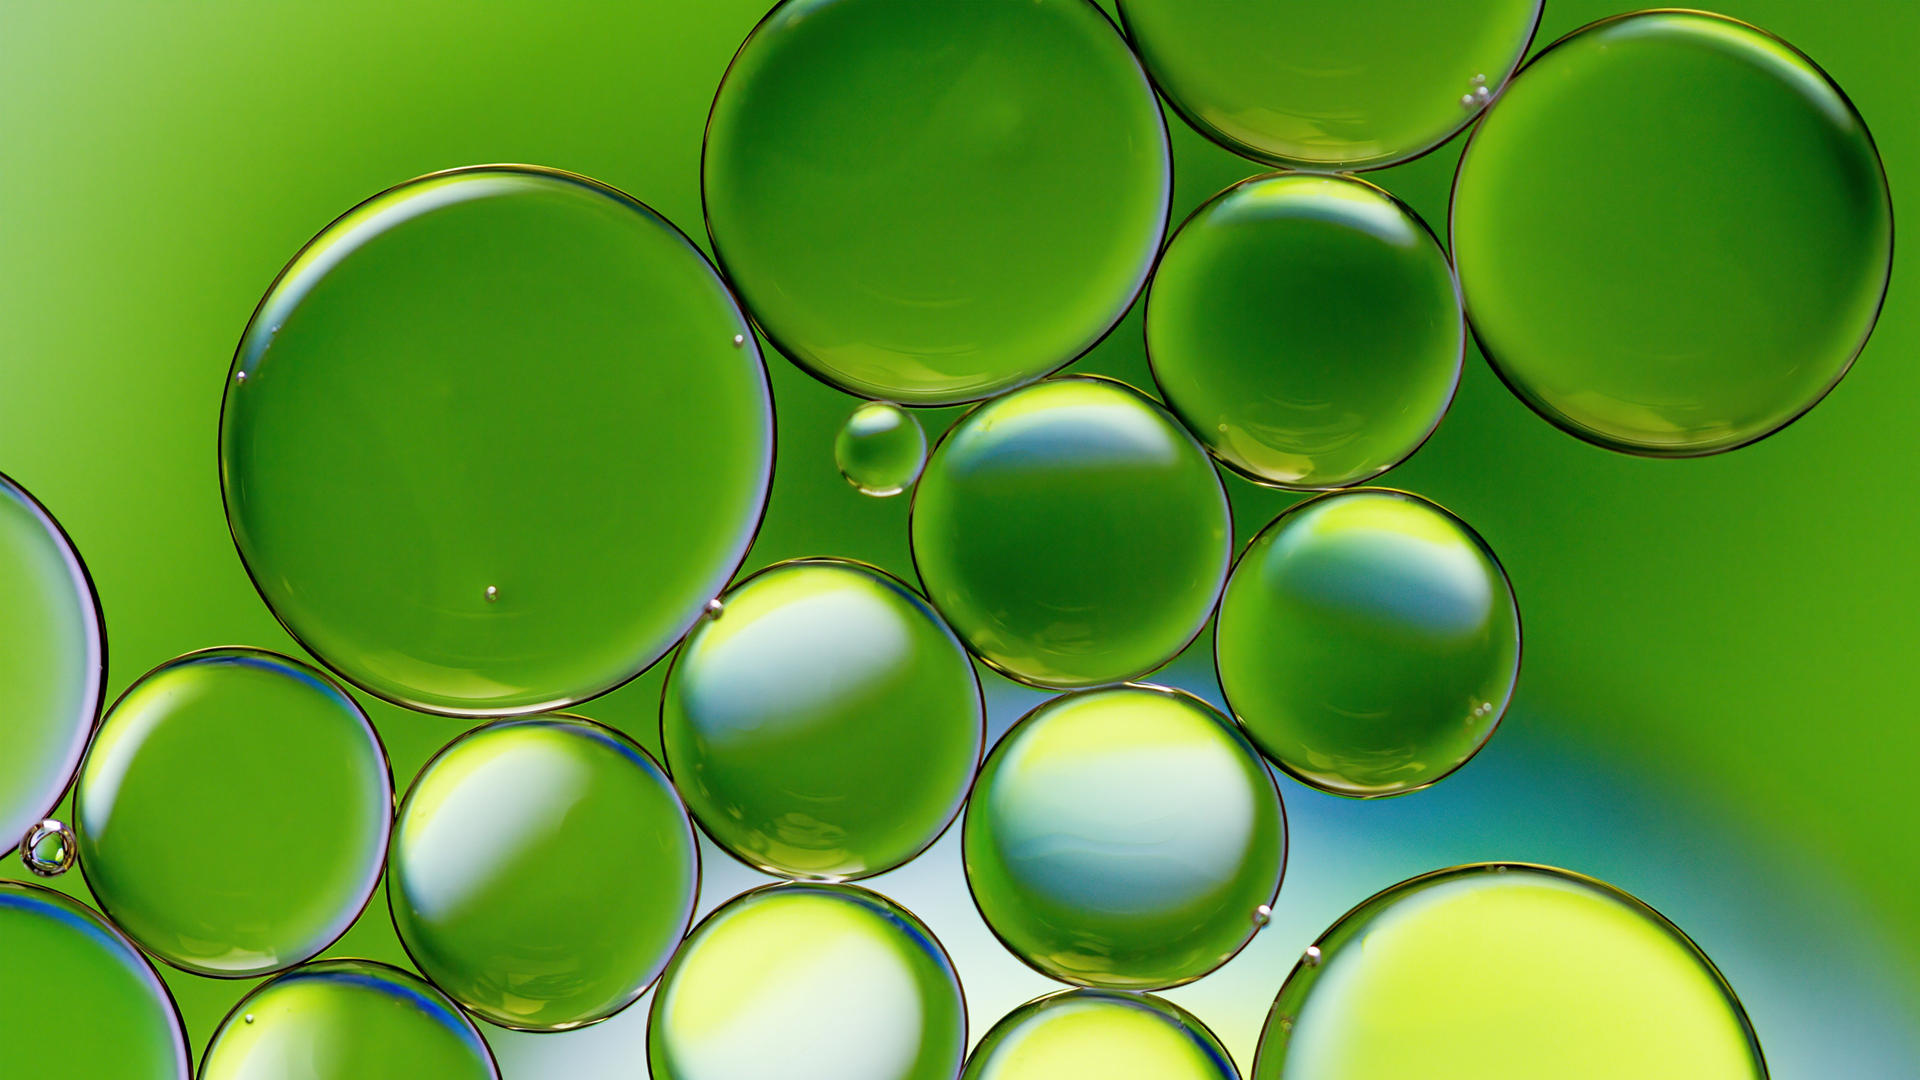 Colourful image of oil drops floating on water